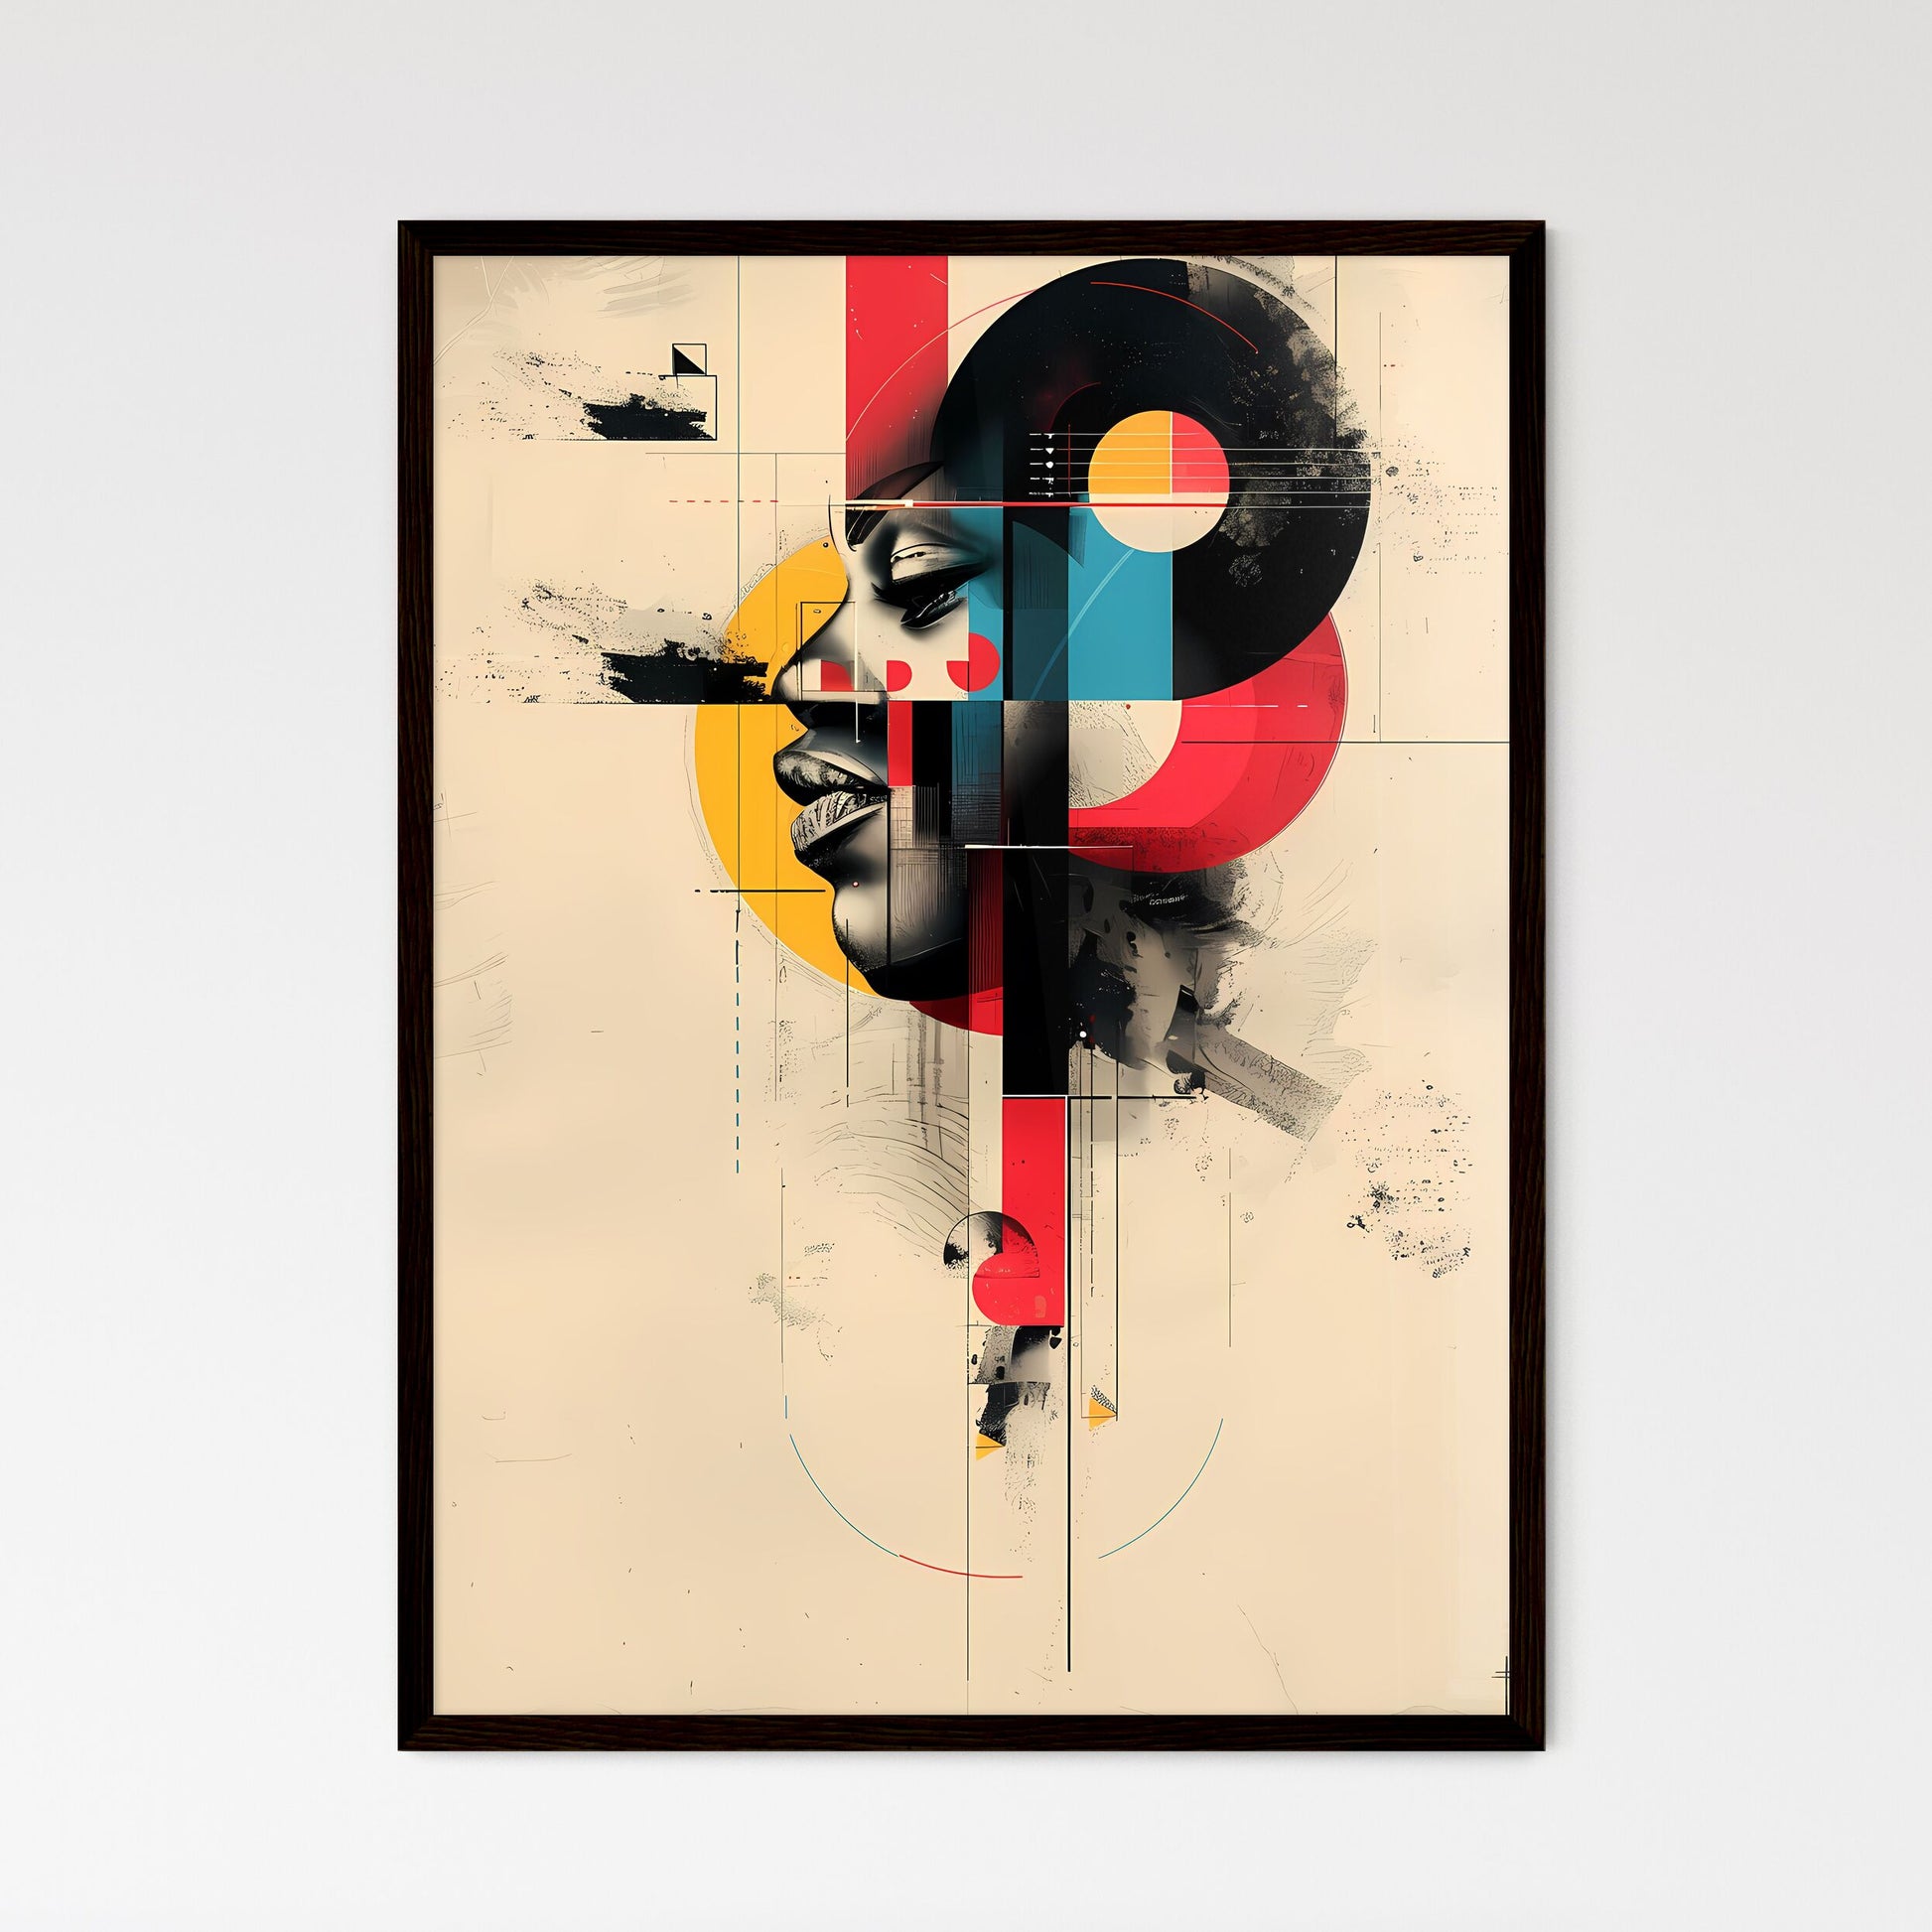 Bauhaus-inspired Artwork: Vibrant Painting Capturing the Essence of this Influential Design Movement Default Title